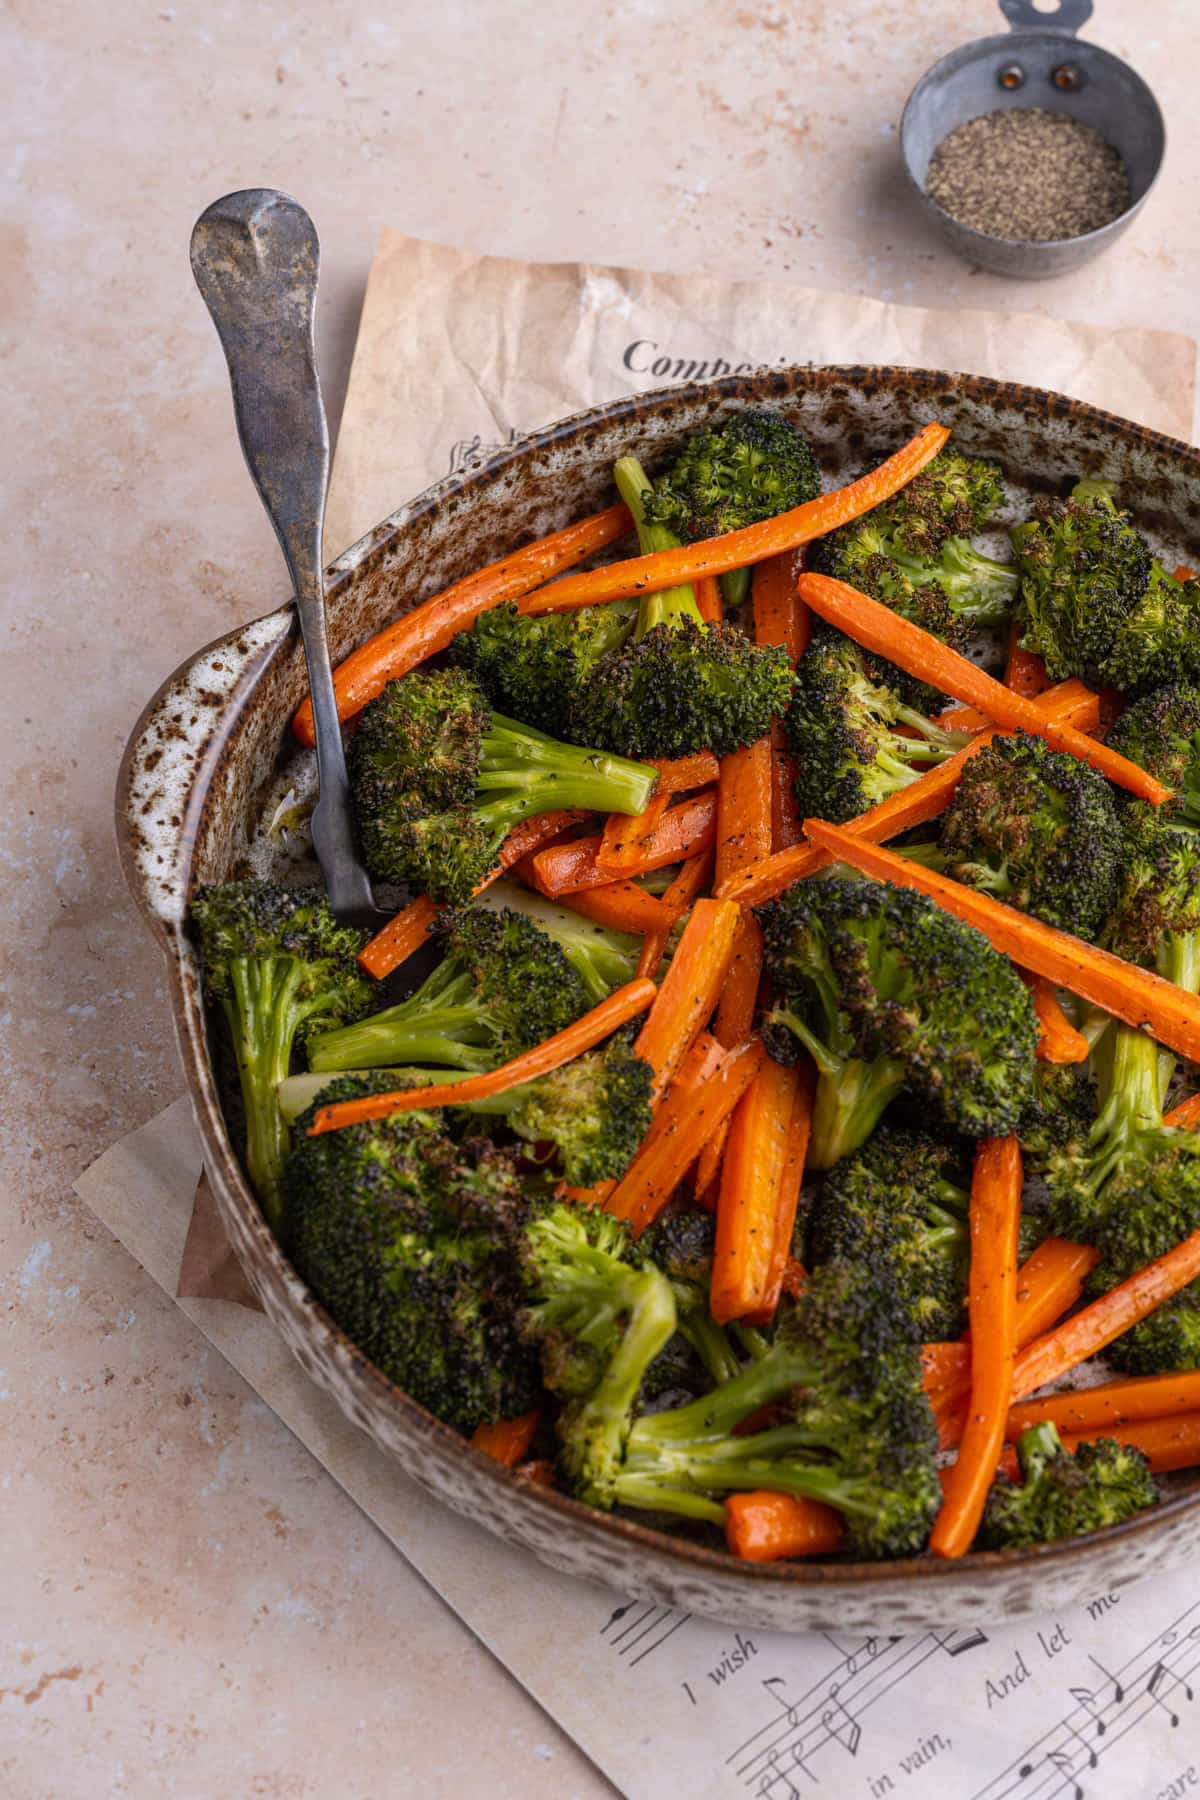 Roasted Broccoli and Carrots with a serving spoon